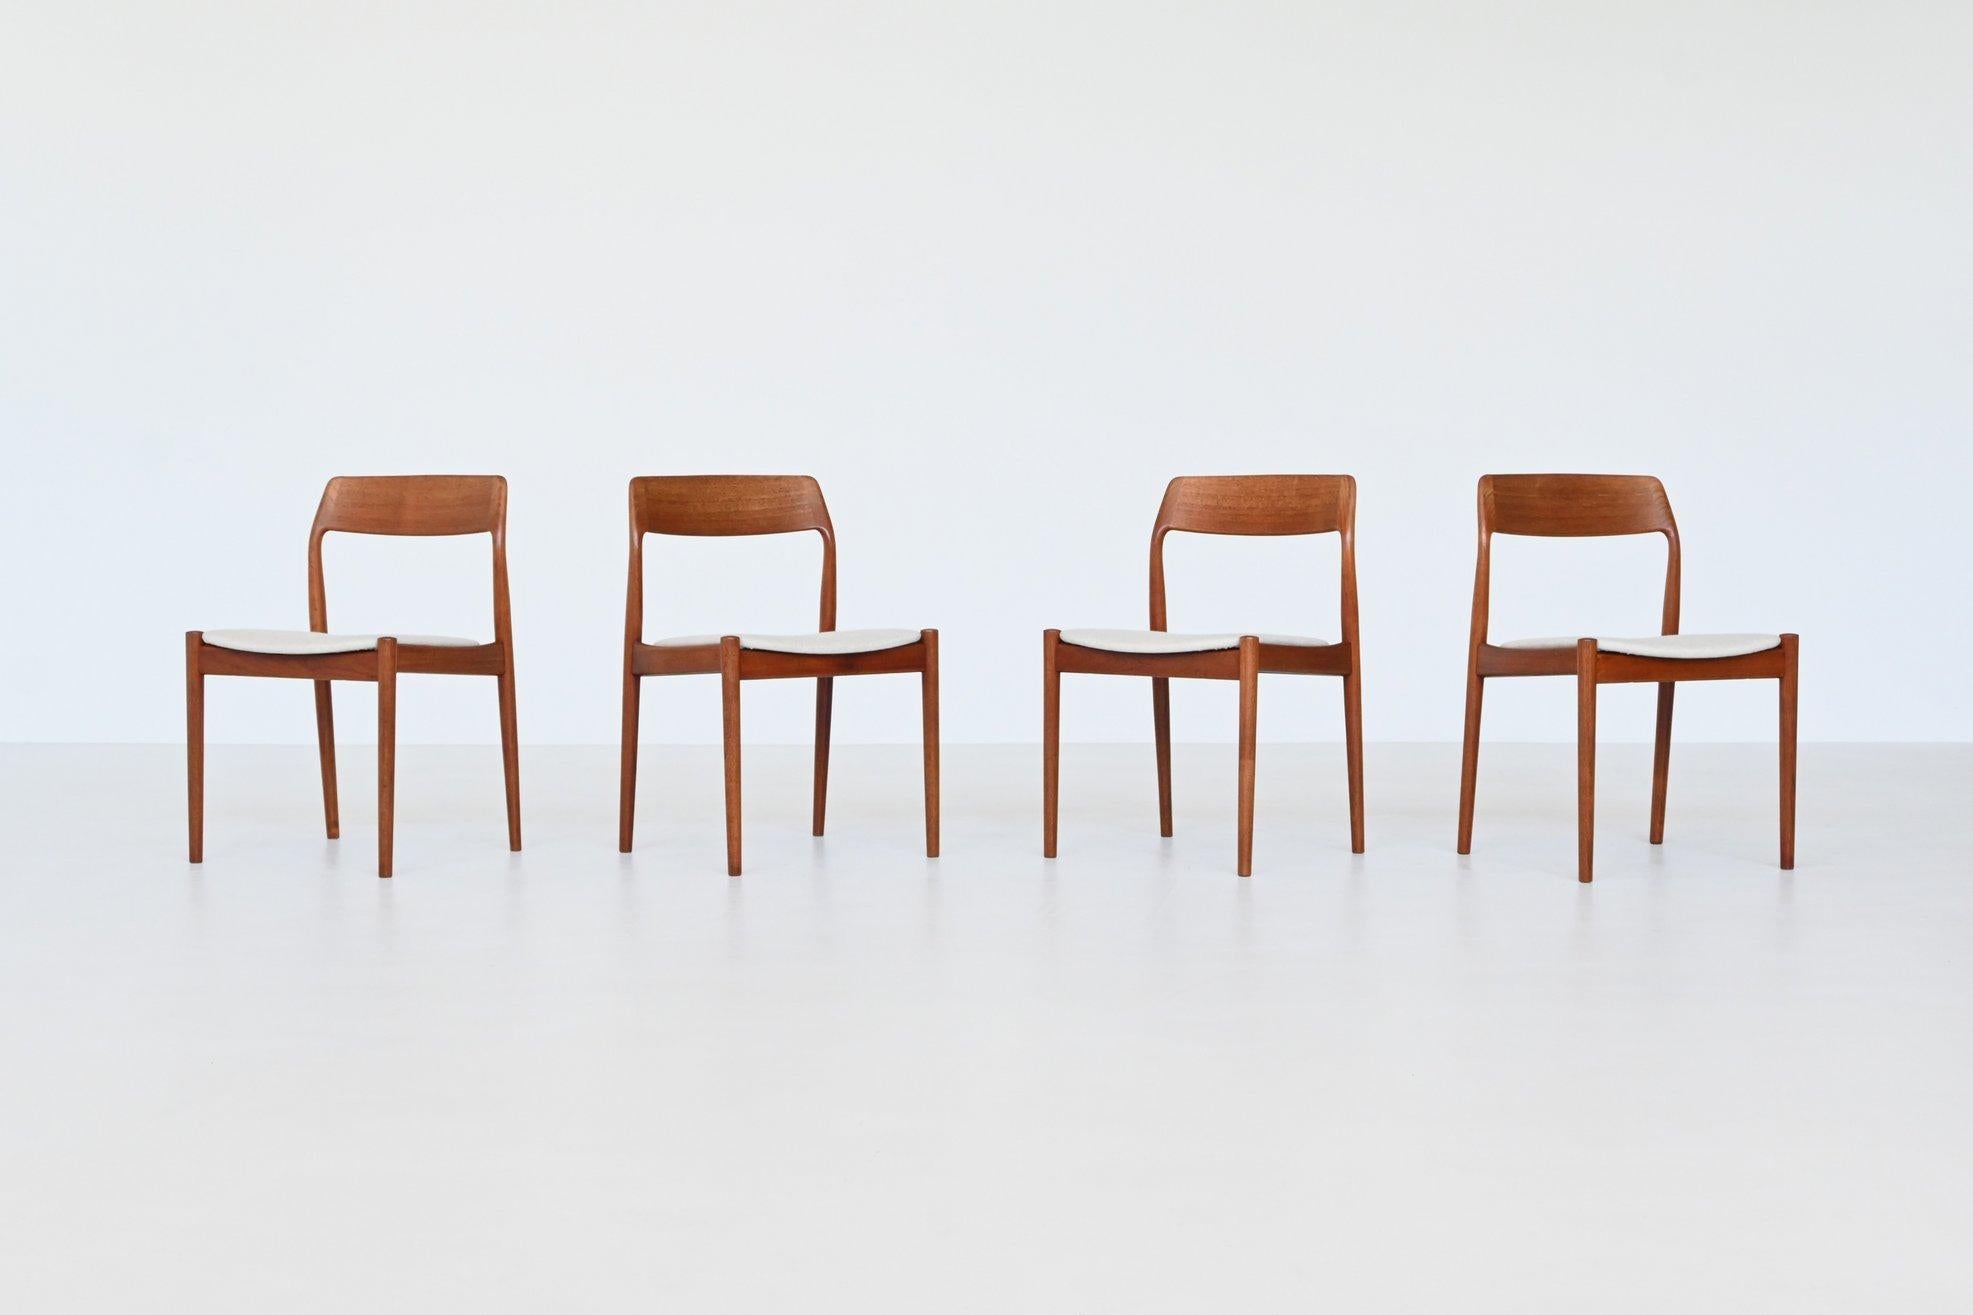 Very nice set of four dining chairs designed by Johannes Nørgaard for Nørgaards Møbelfabrik, Denmark 1963. They are made of solid teak wood and the seats are upholstered with high quality Richwool fabric. These well-crafted and nicely shaped chairs